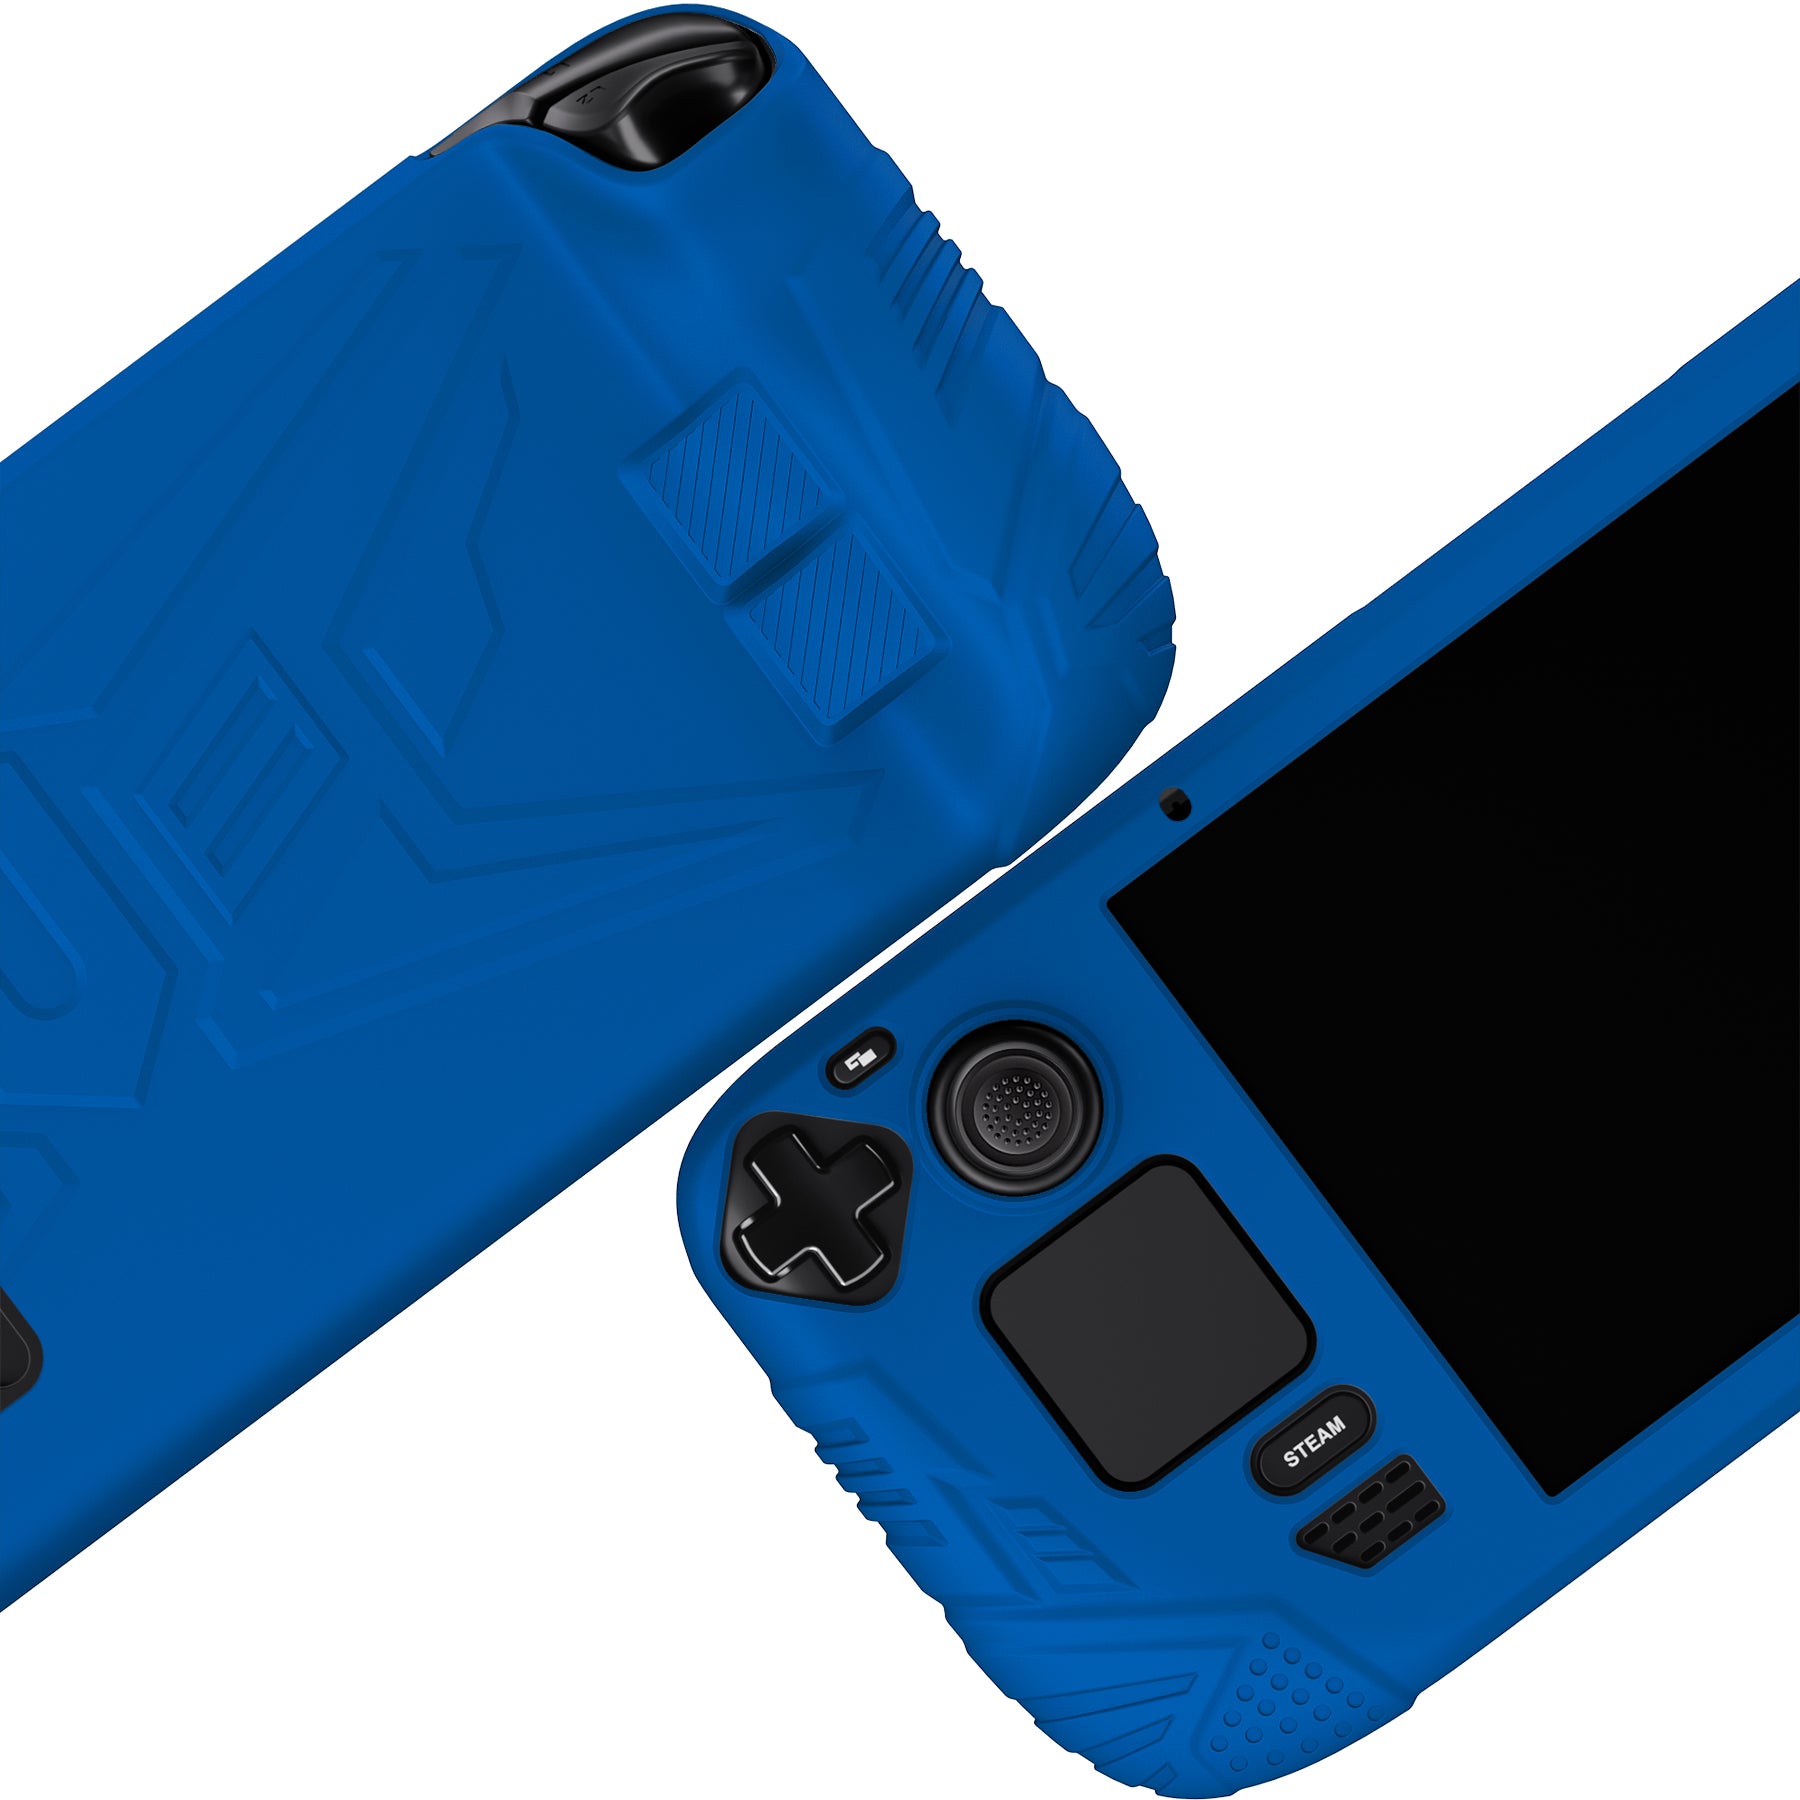 PlayVital Armor Series Protective Case for Steam Deck LCD, Soft Cover Silicone Protector for Steam Deck with Back Button Enhancement Designed & Thumb Grips Caps - Blue - XFSDP006 PlayVital